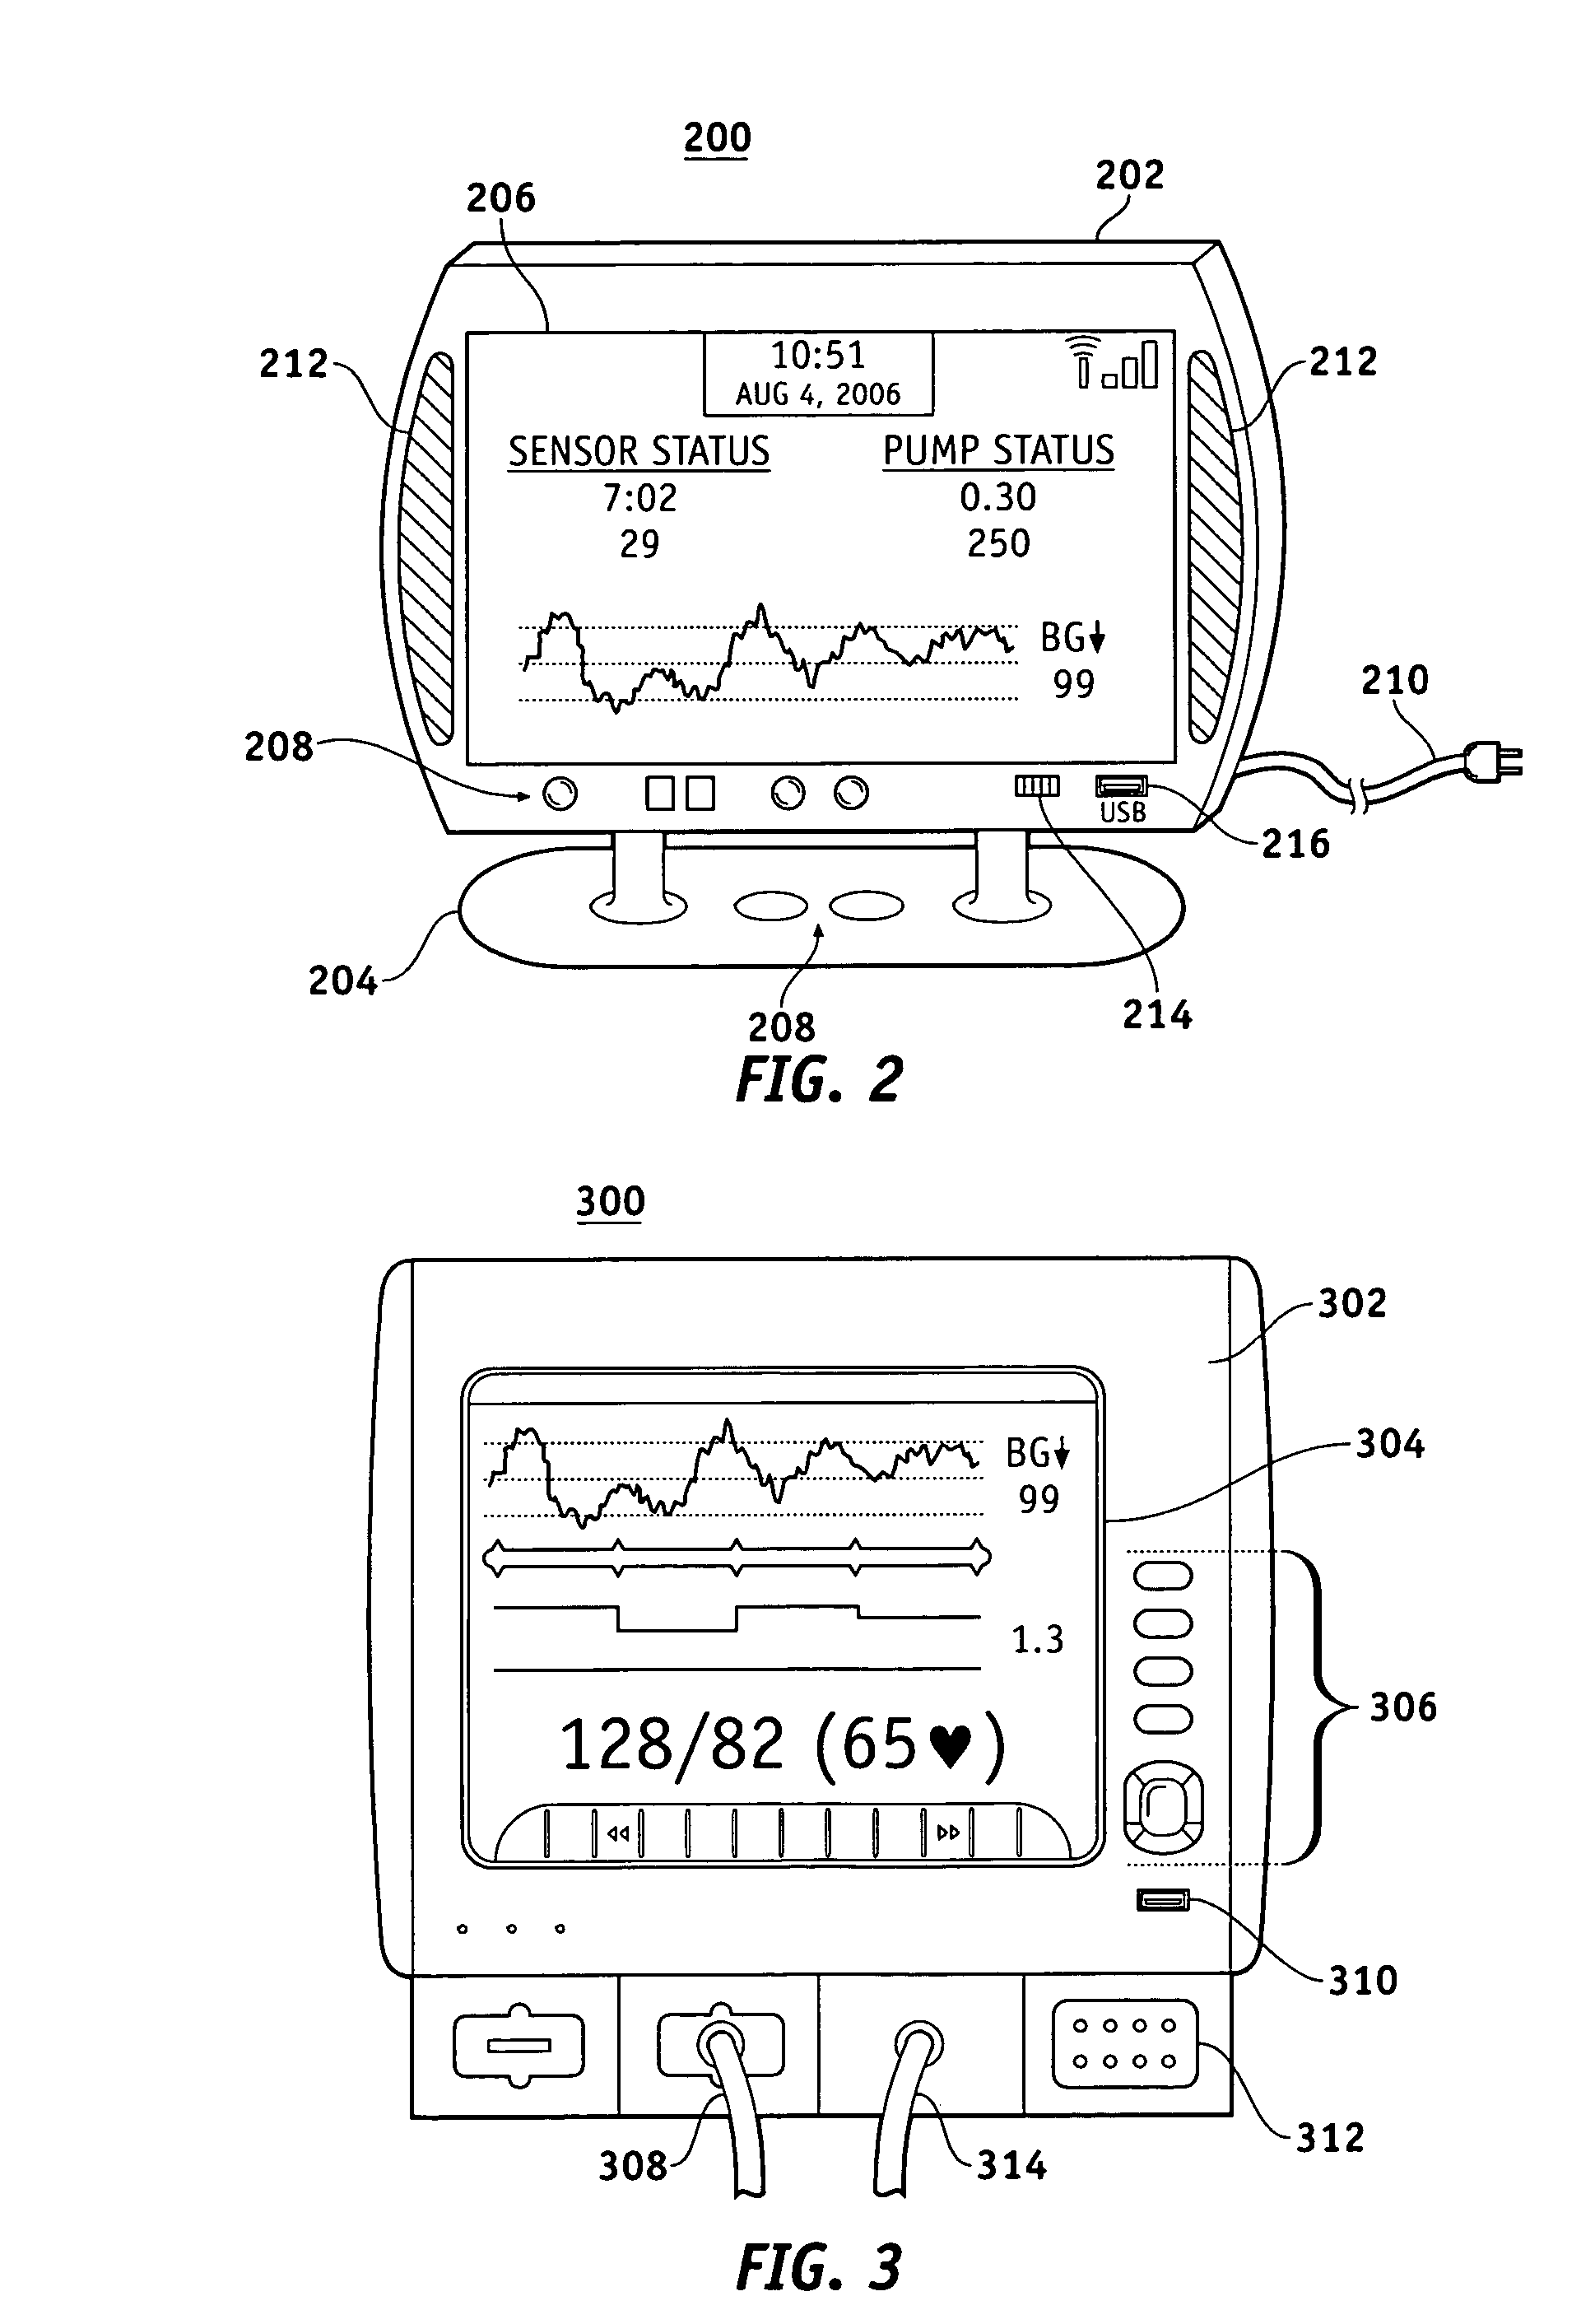 Monitor devices for networked fluid infusion systems